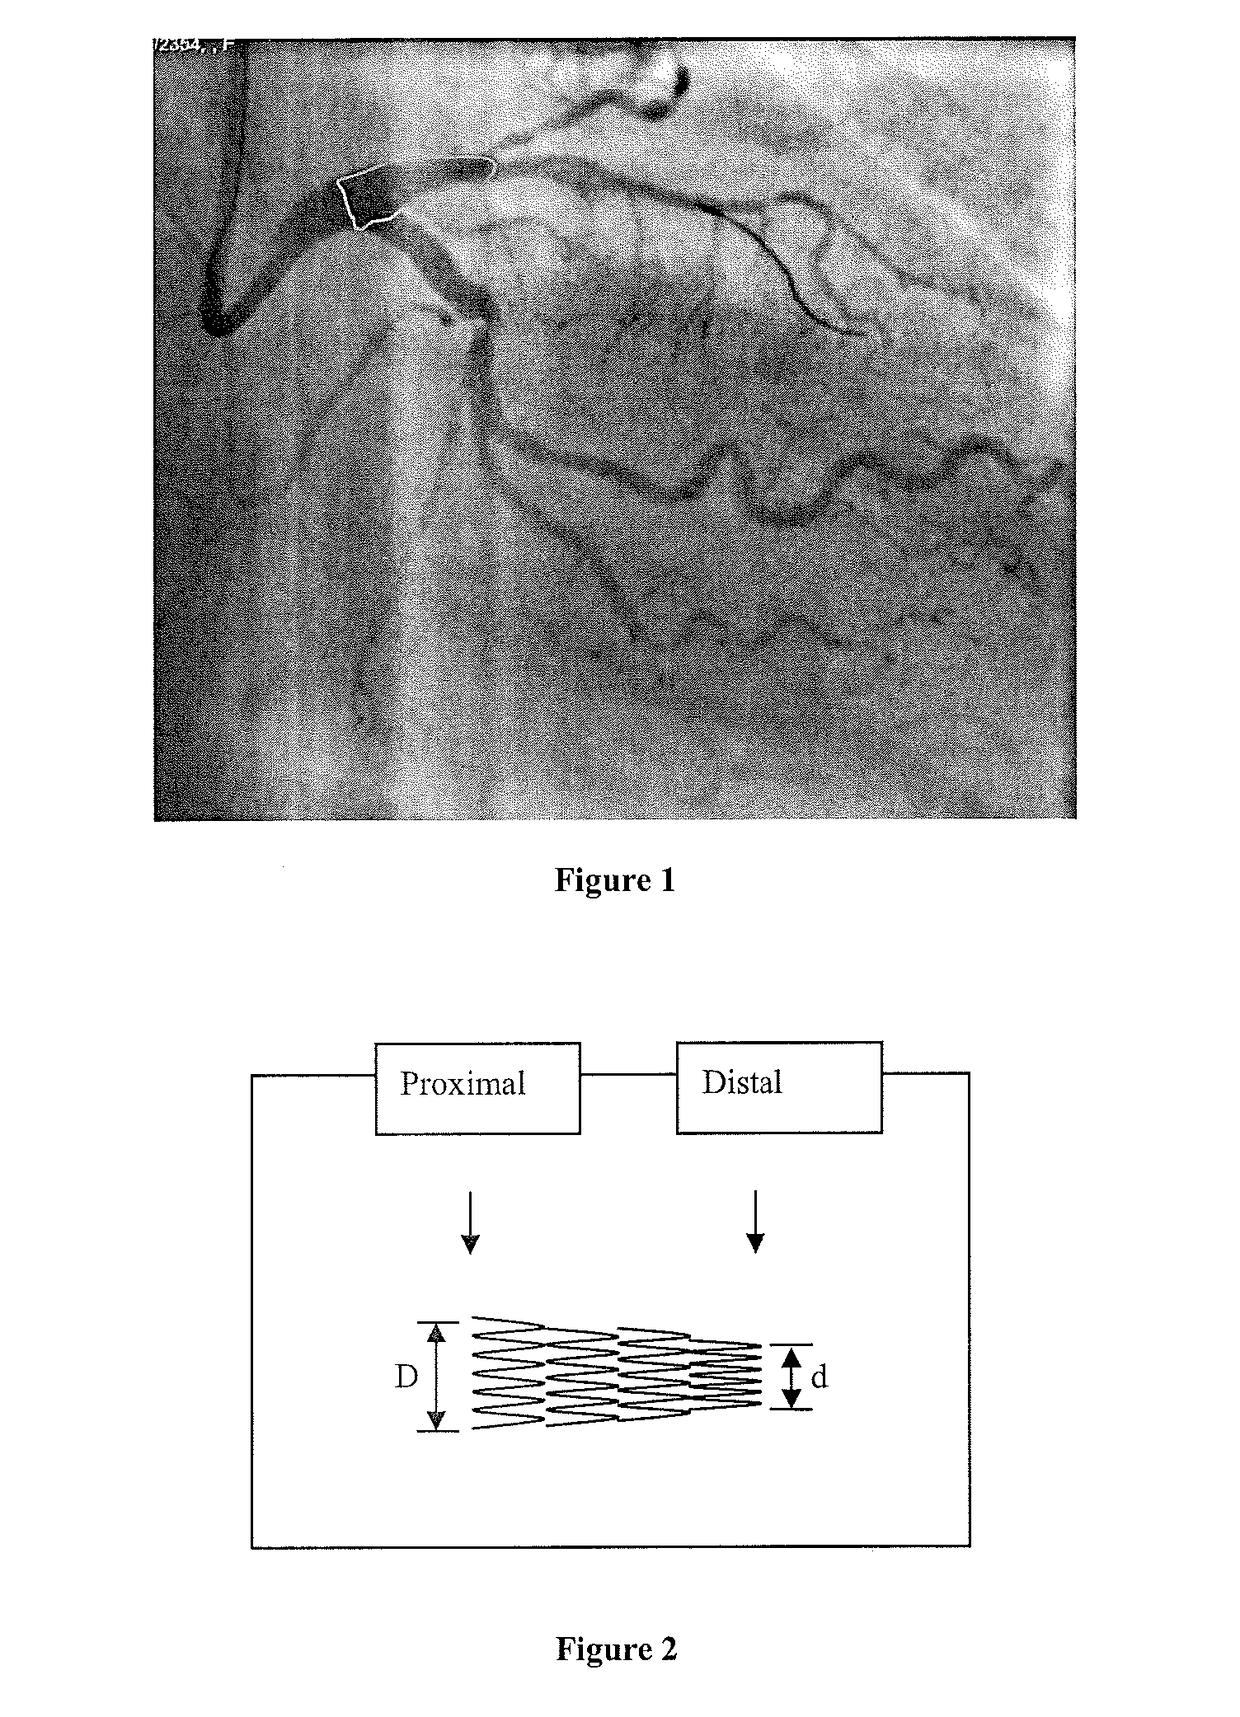 Method of producing personalized biomimetic drug-eluting coronary stents by 3D-printing